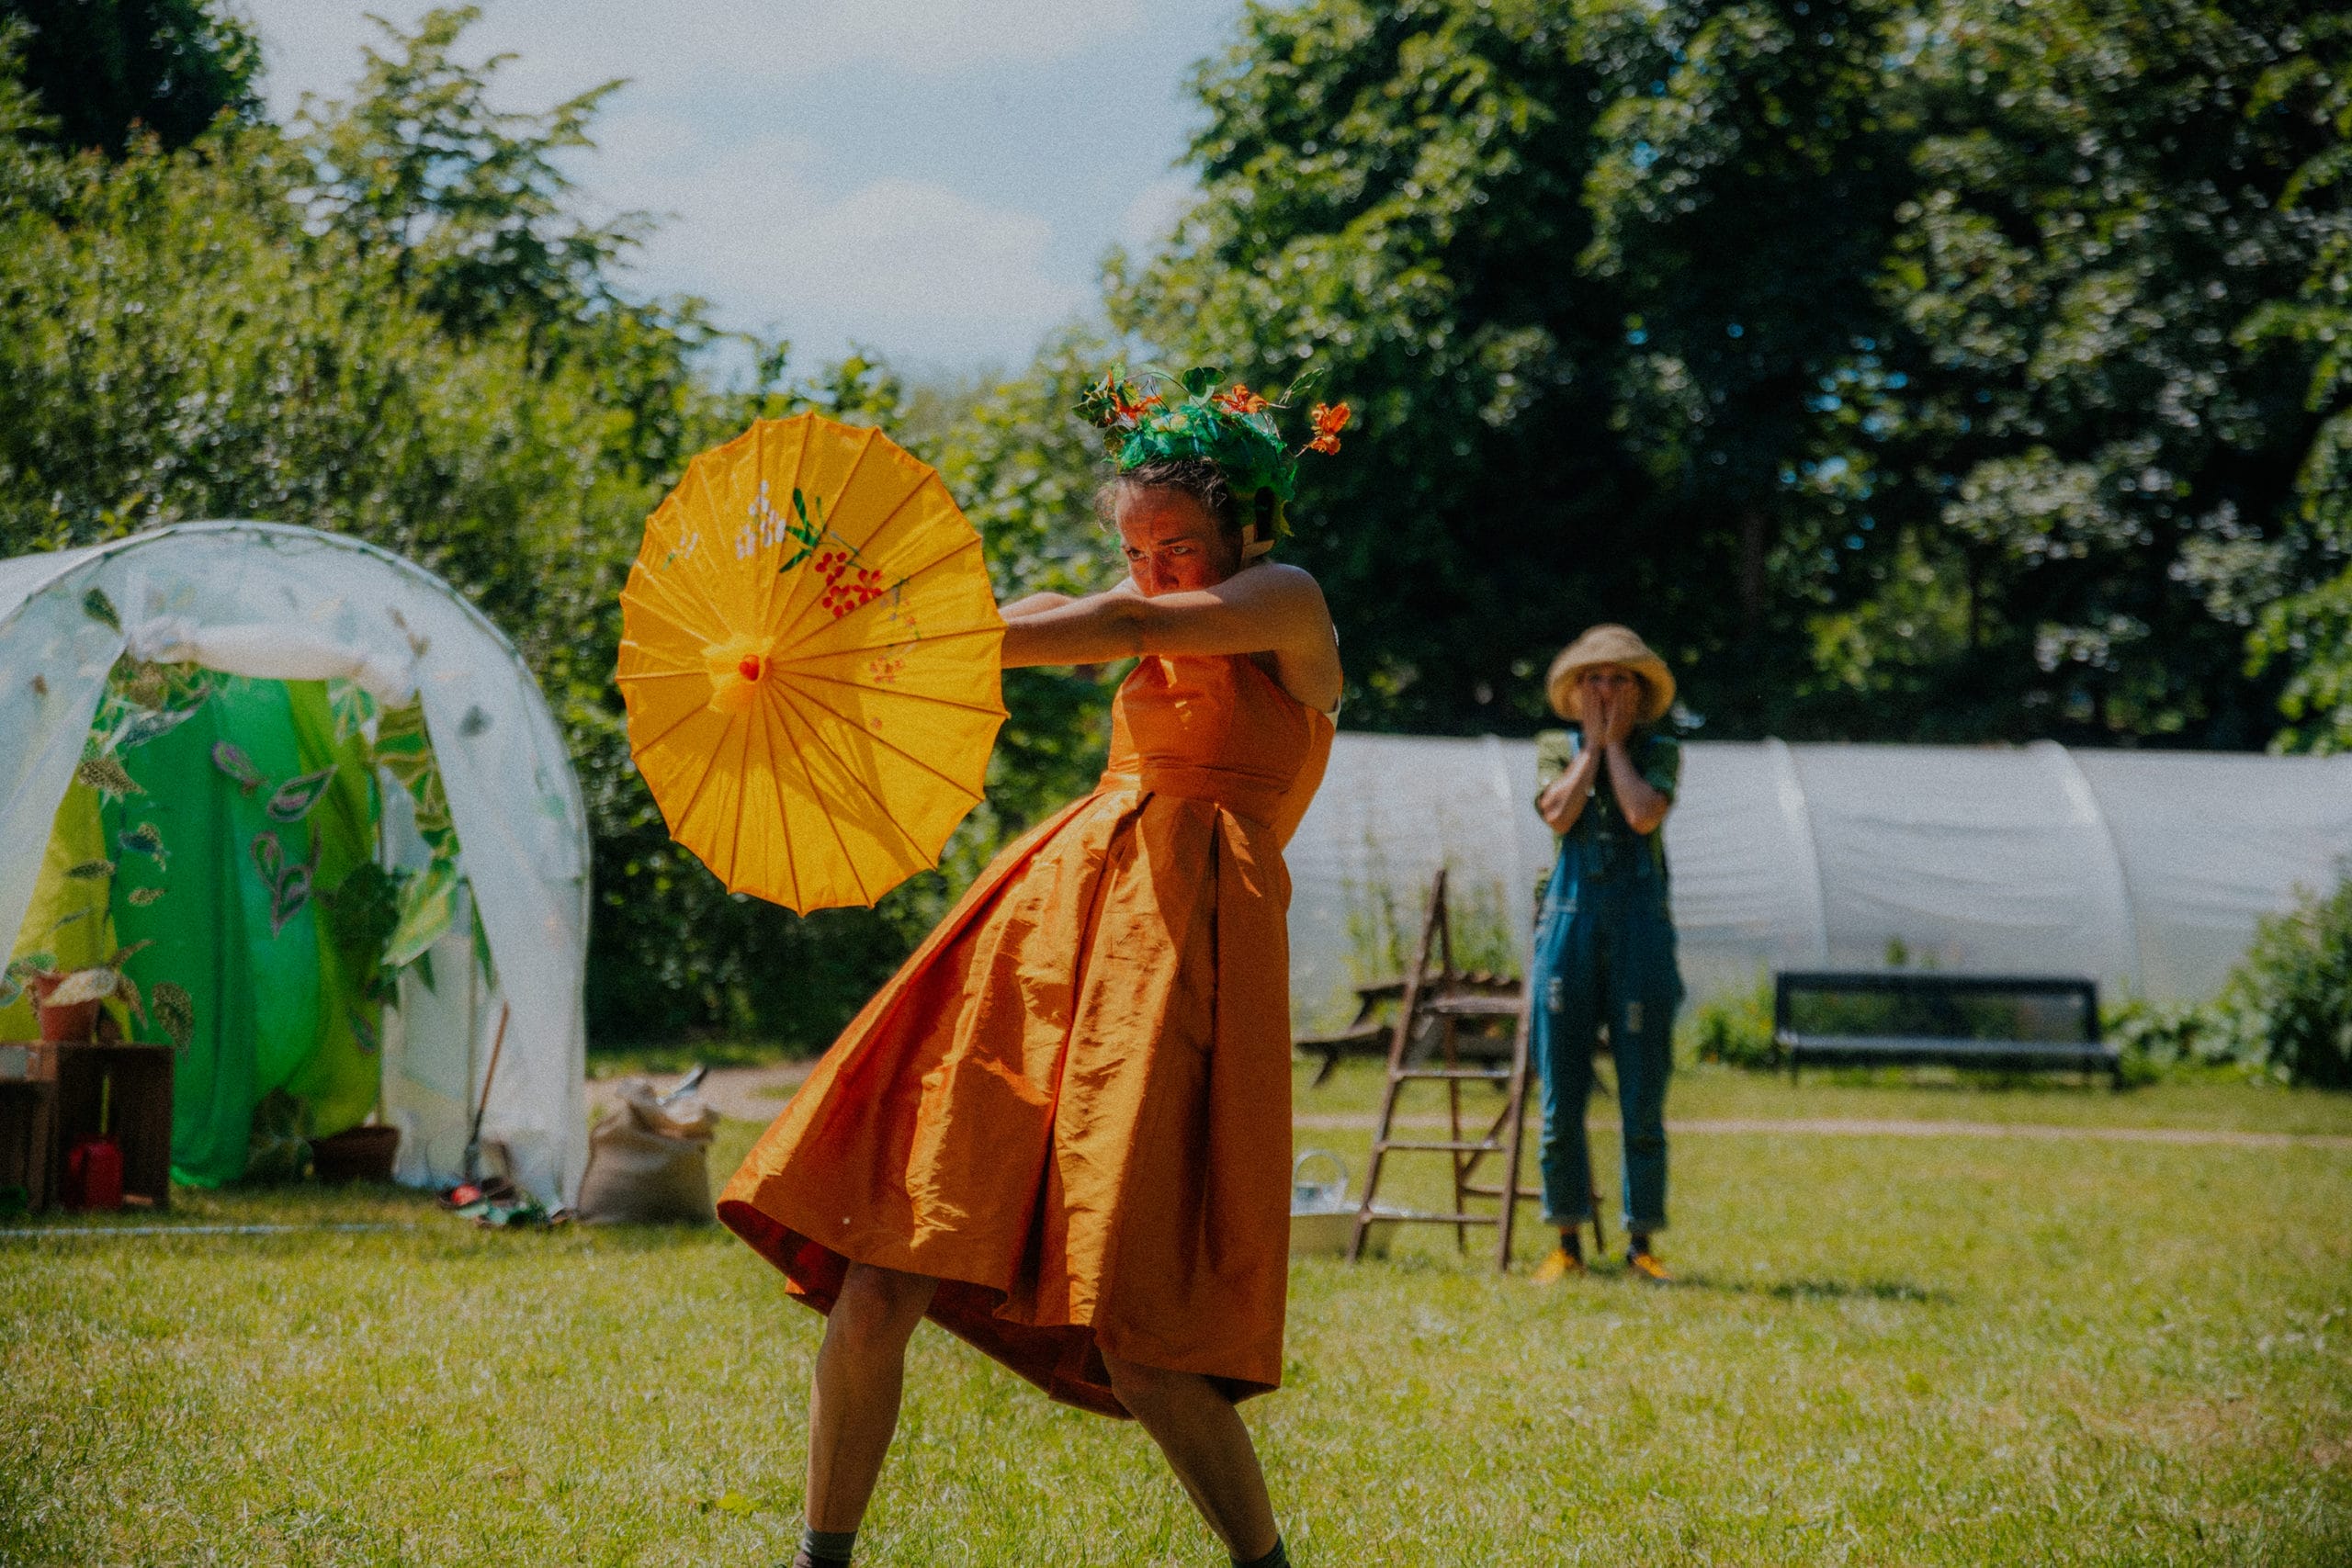 A green outdoor space. In the centre, the performer wears a vibrant golden dress, yellow parasol, and green floral headdress. In the background, another performer wears dungarees and a gardener's hat.